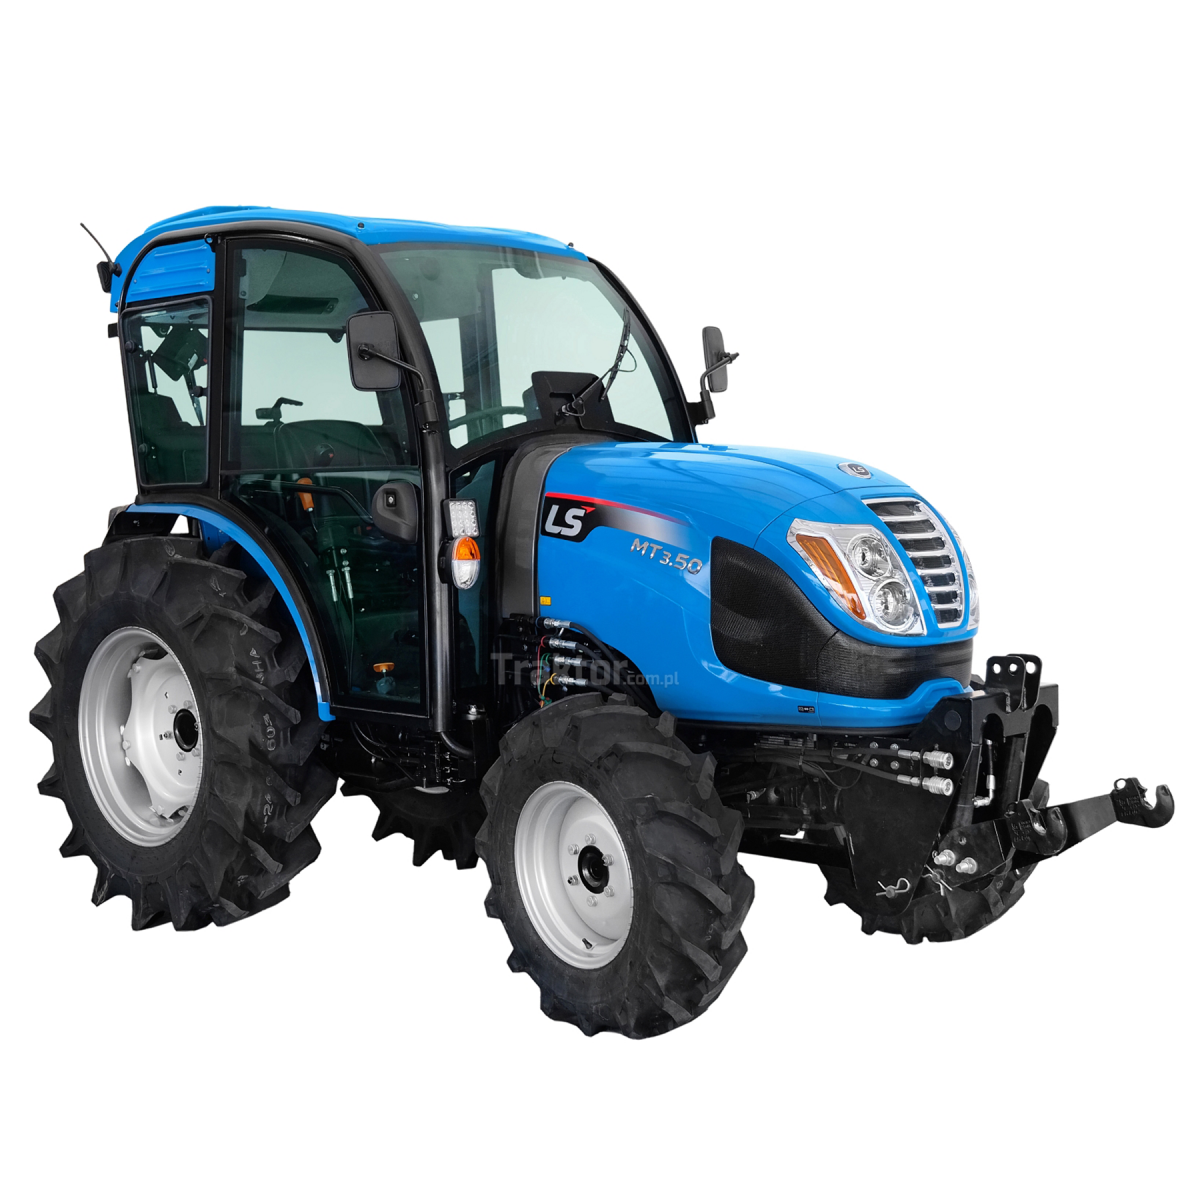 LS Tractor MT3.50 MEC 4x4 - 47 HP / CAB with air conditioning + front linkage for the Premium 4FARMER tractor